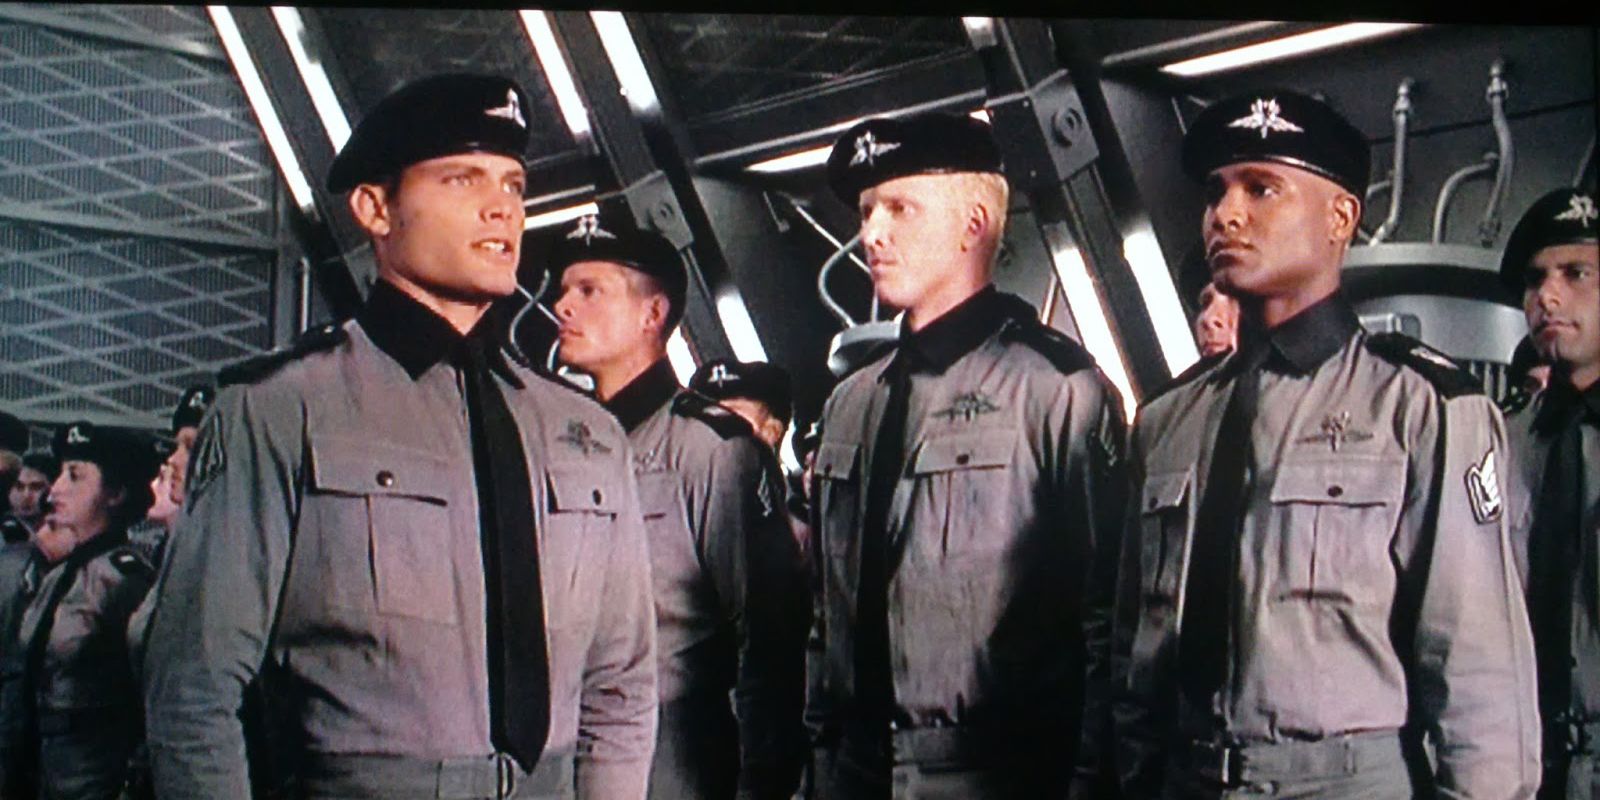 Militant soldiers stand to attention in uniform in Starship Troopers.